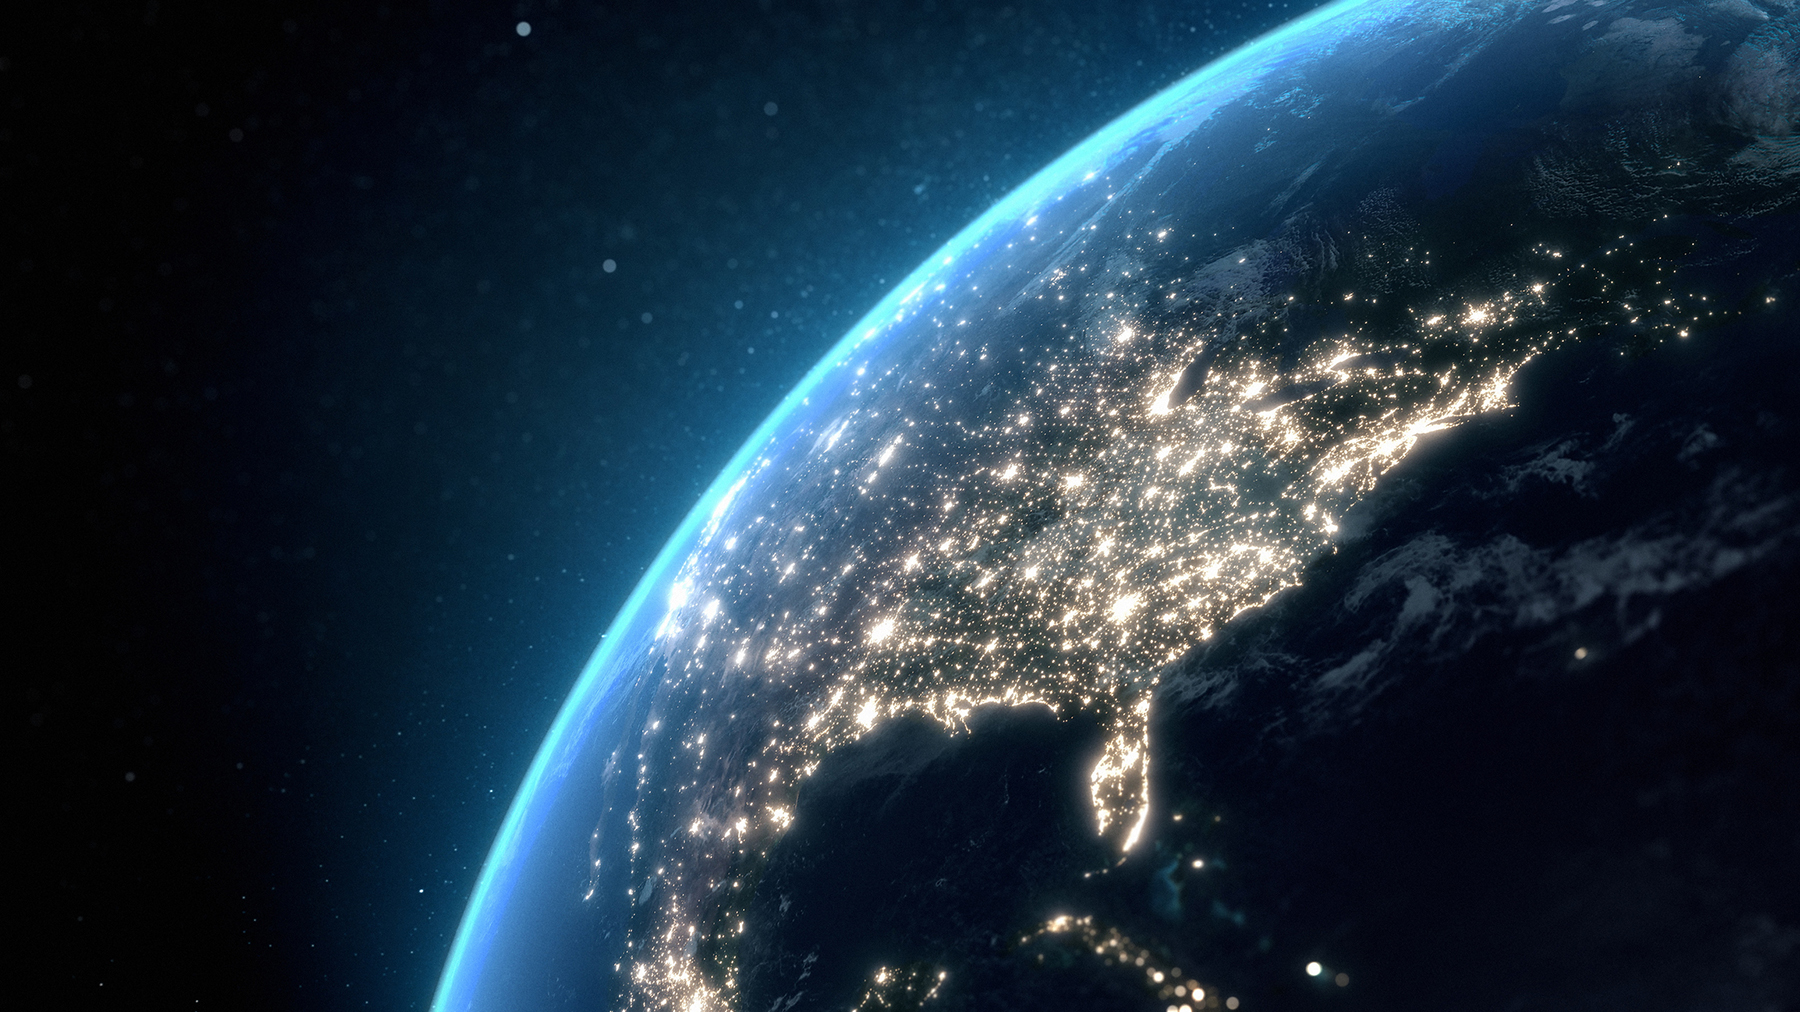 view of Earth from space, North America lit up at night